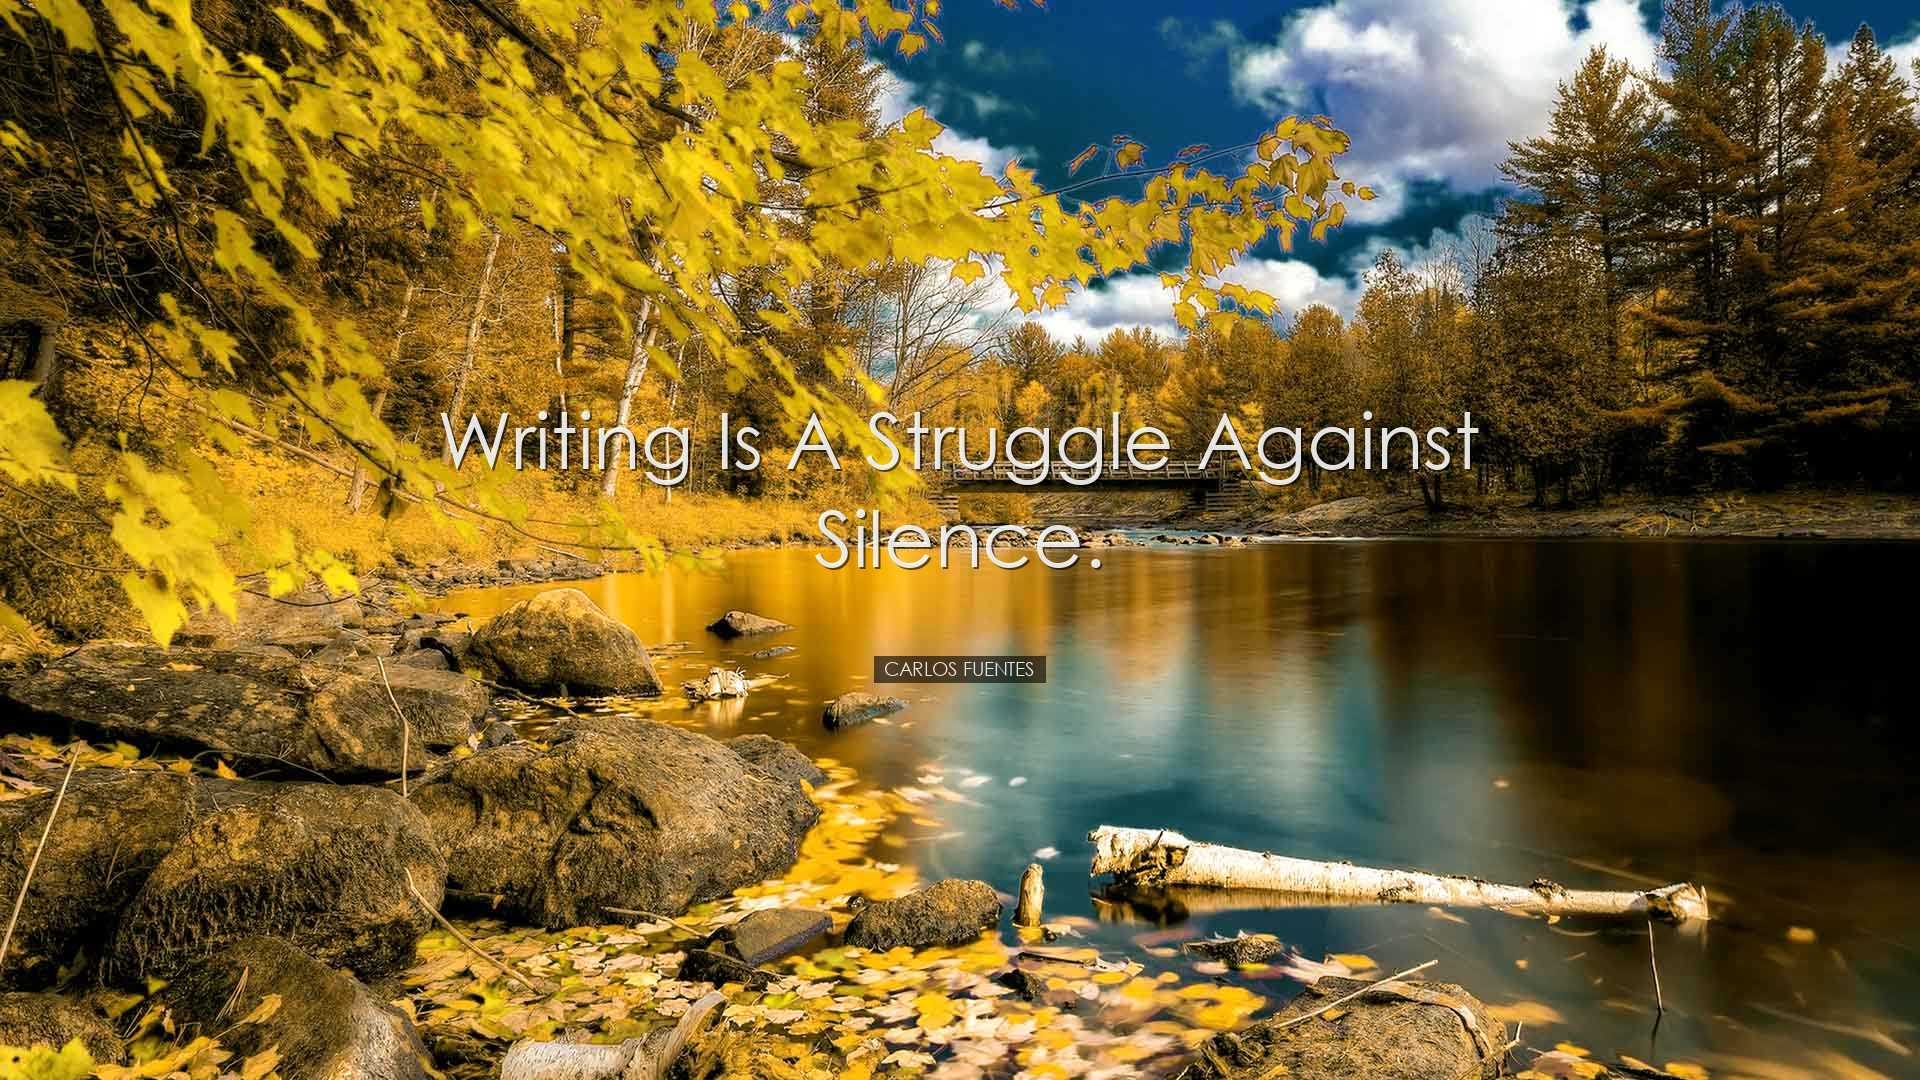 Writing is a struggle against silence. - Carlos Fuentes